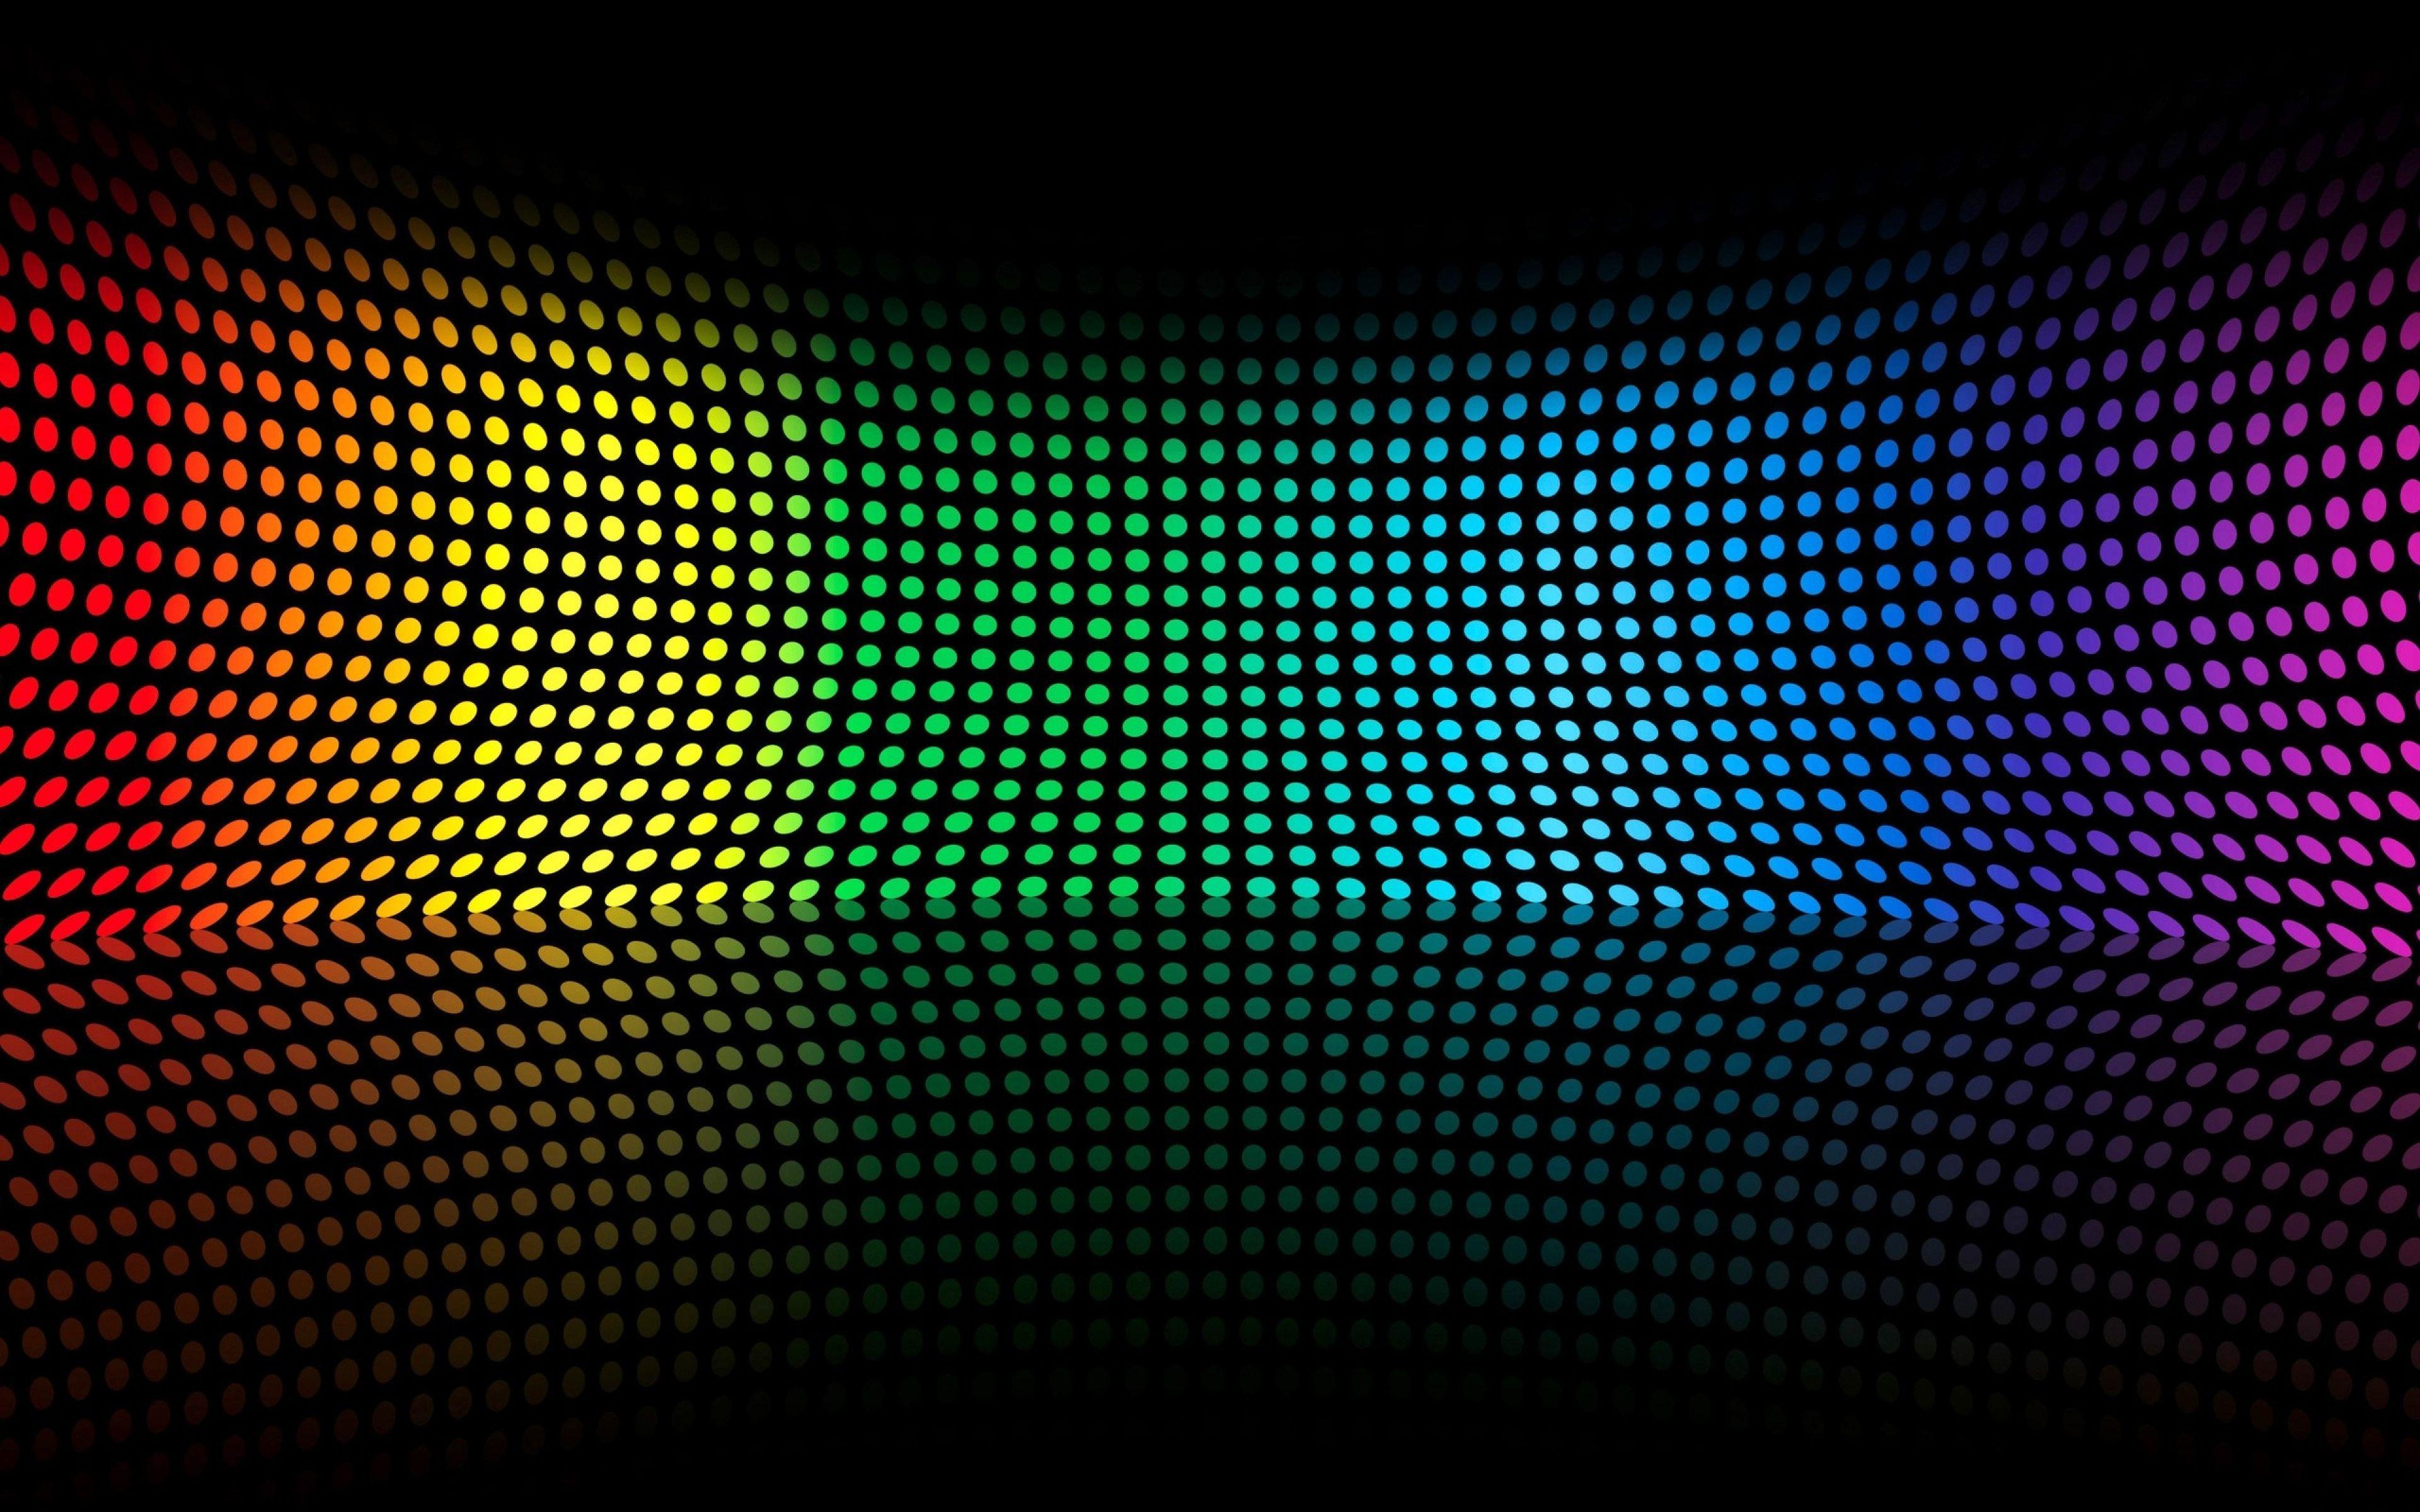 Colorful Curved Disco Light Image 3840x2400. file